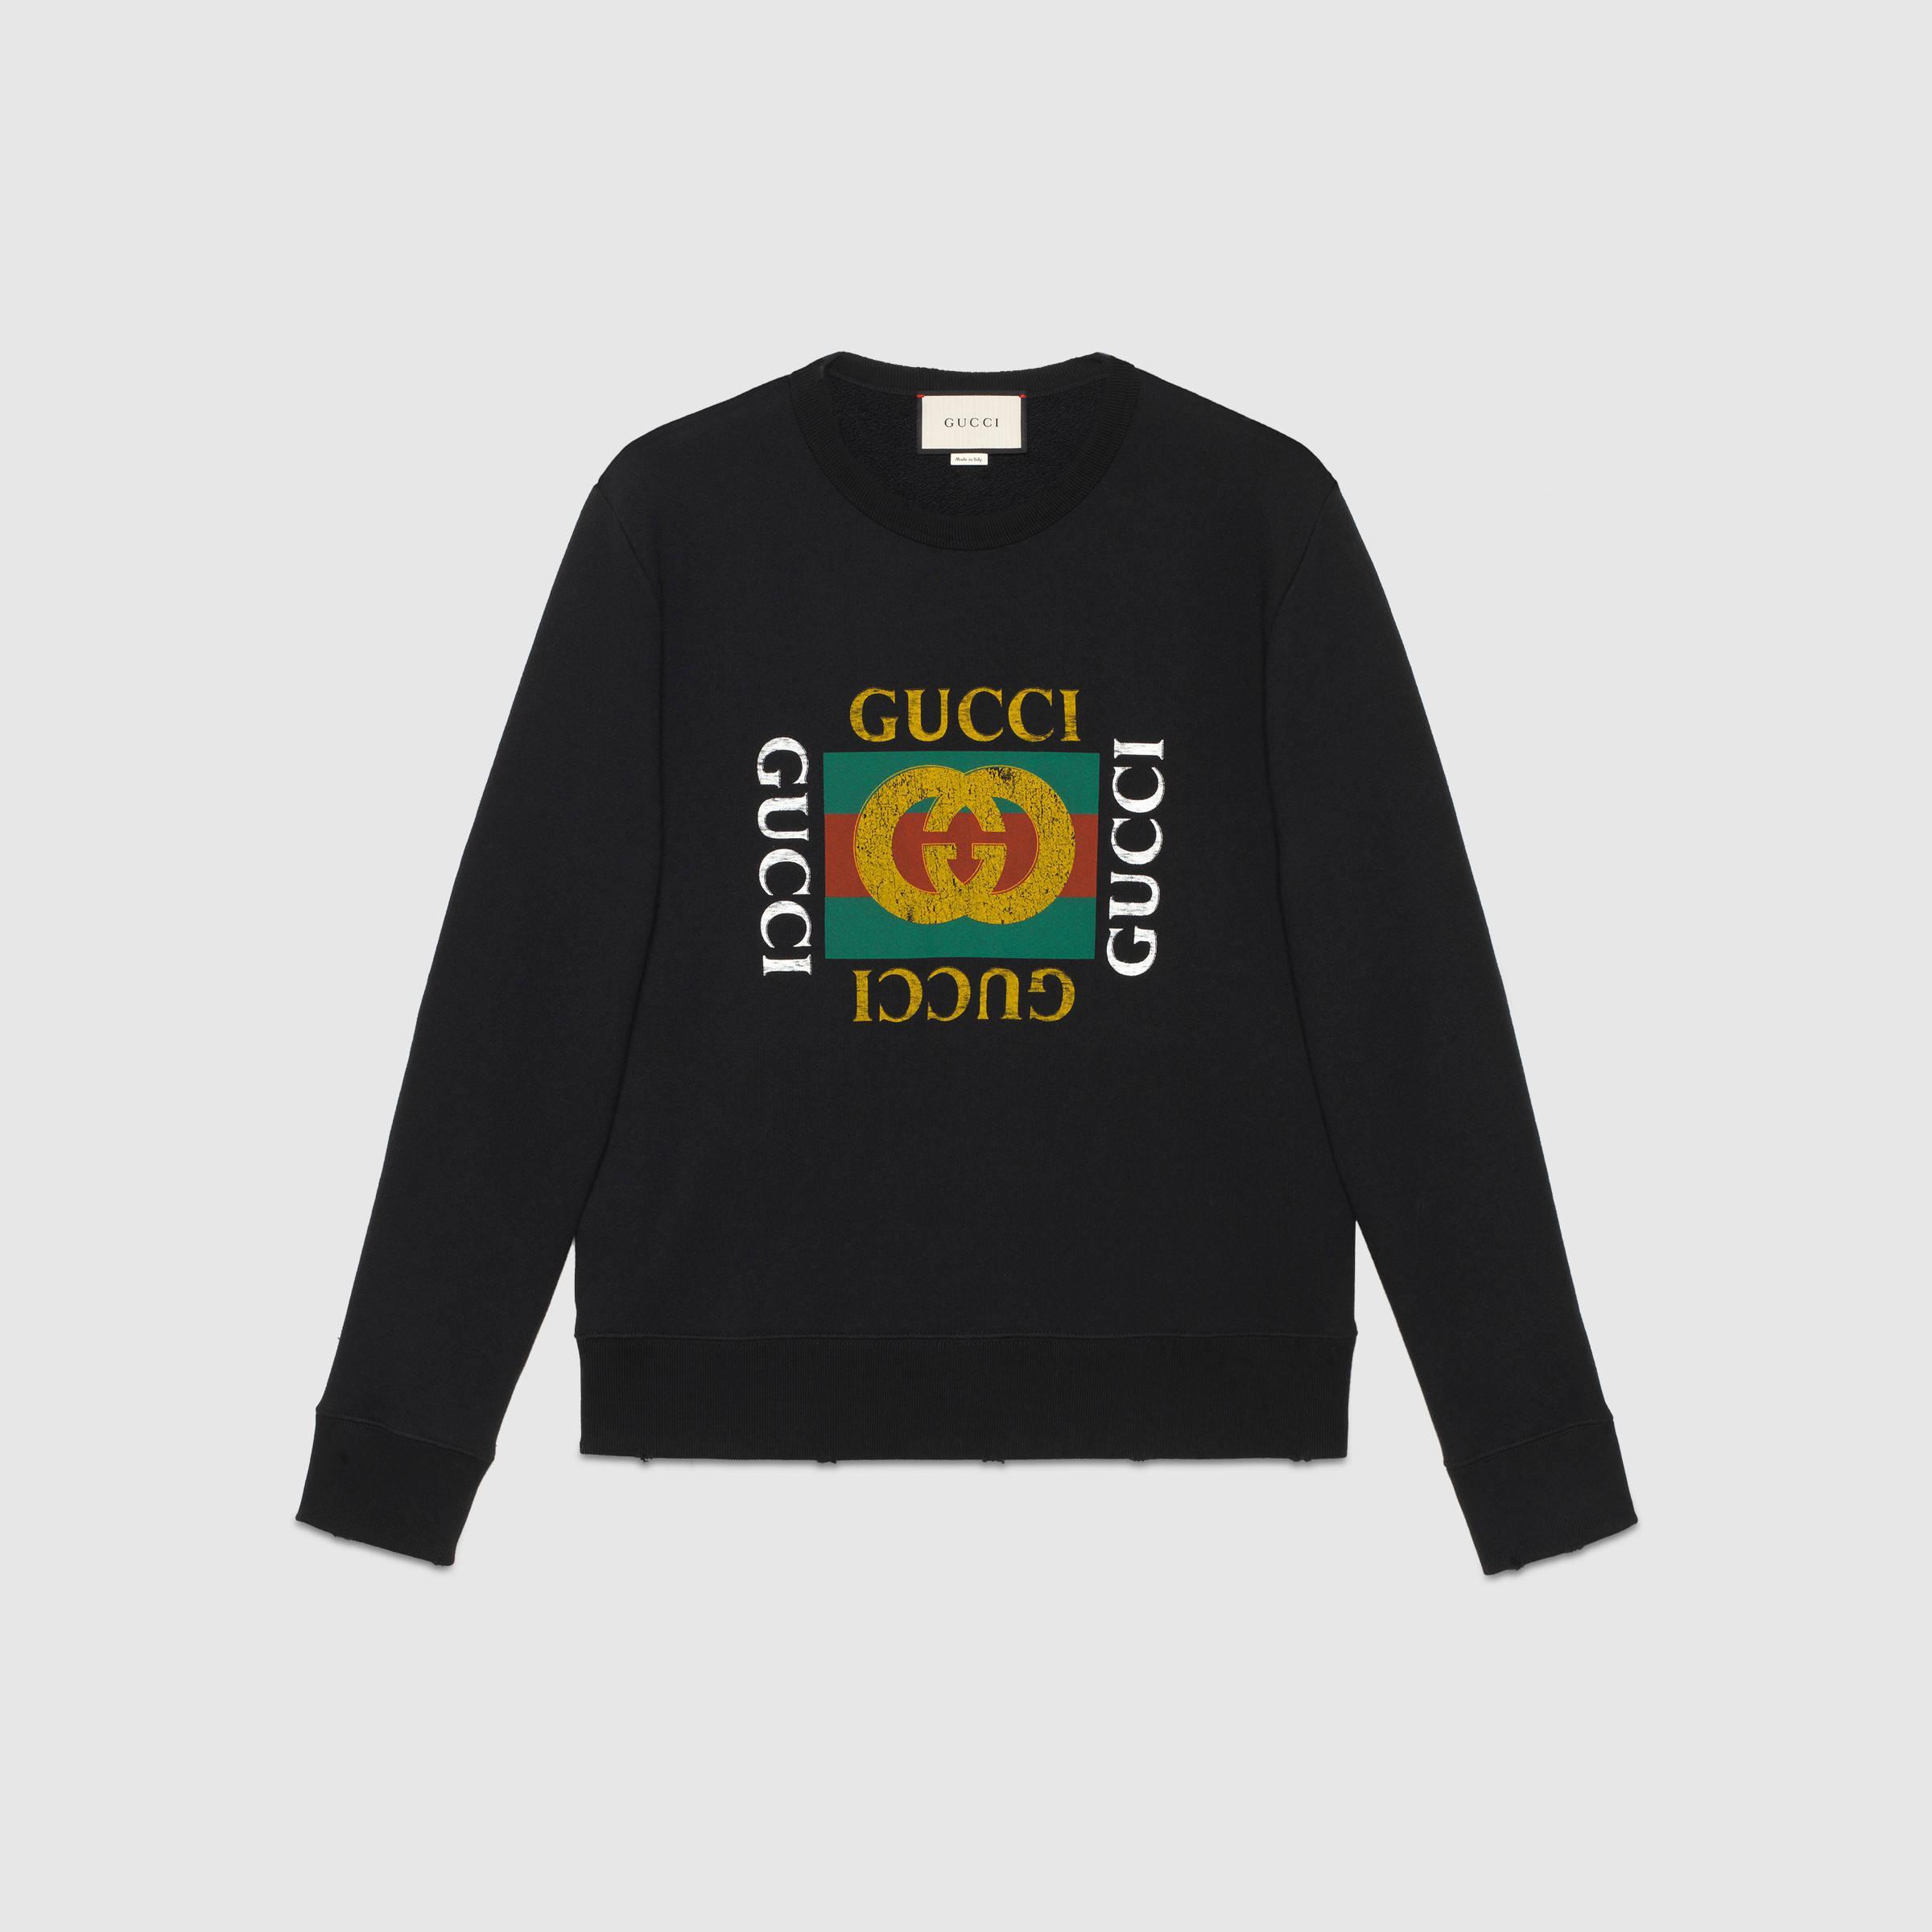 Real Gucci Logo - Discount Real Gucci Cotton sweatshirt with Gucci logo For Sale ...